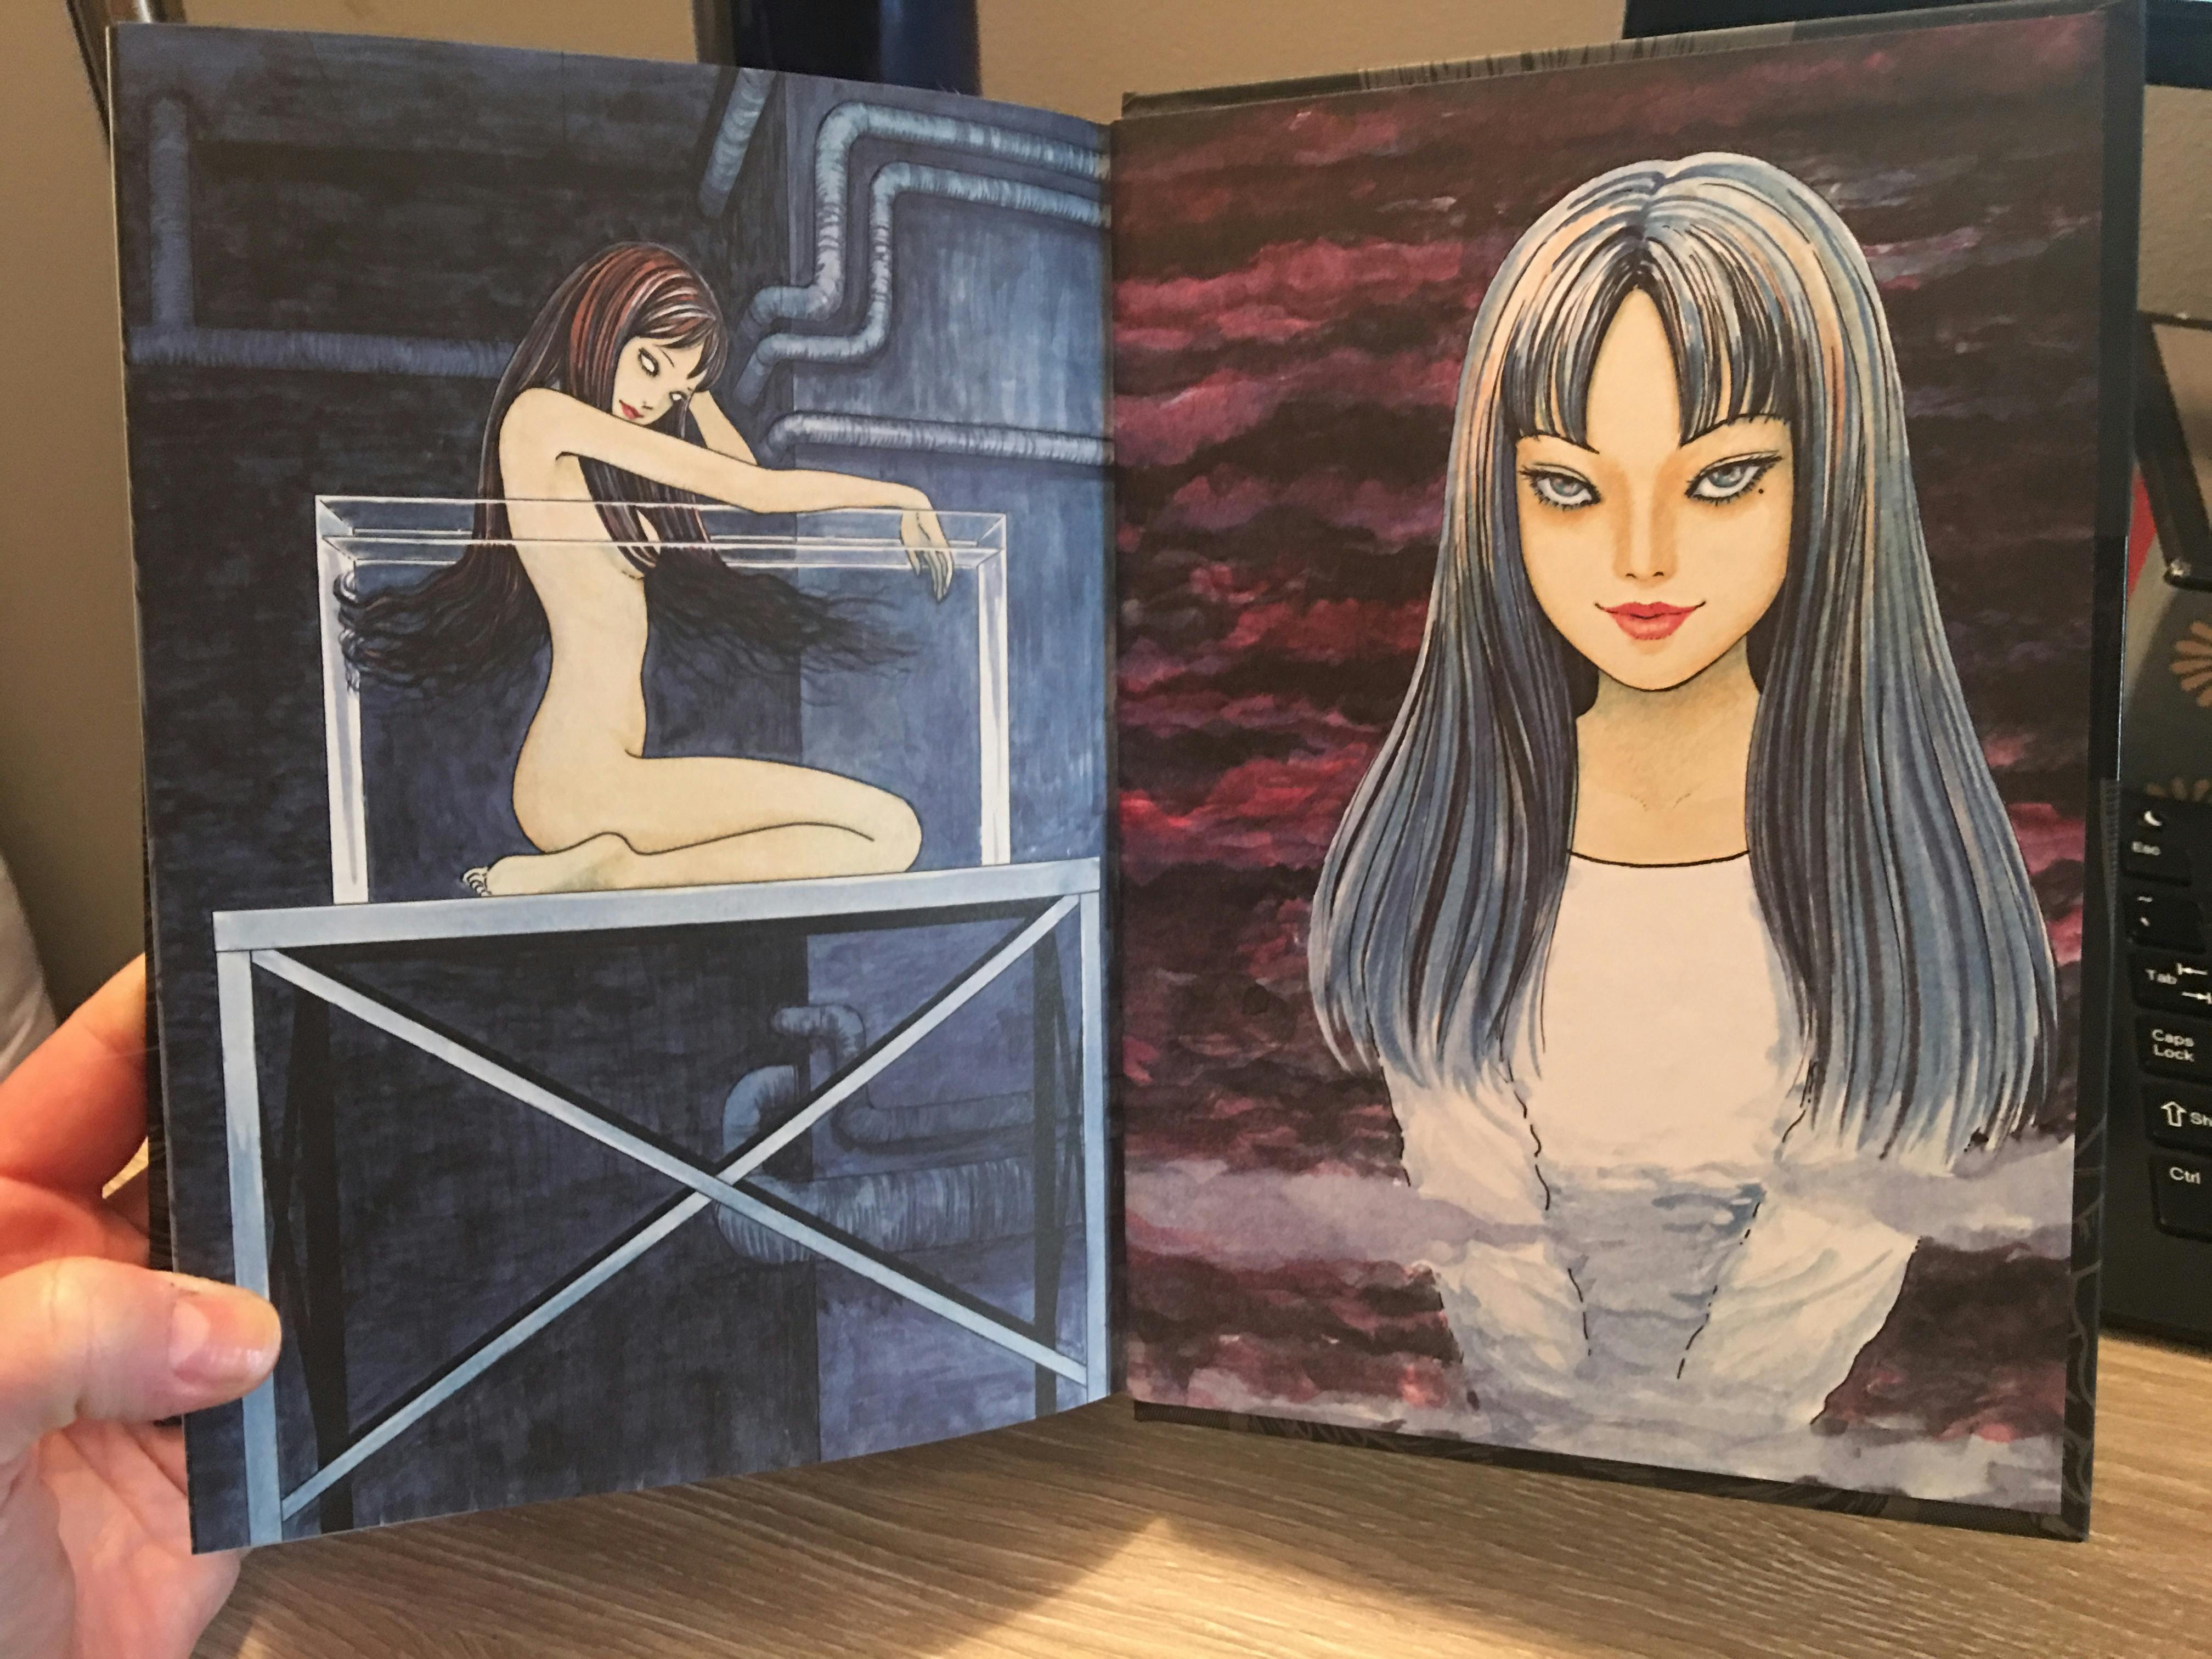 Ito's chilling art adorns the inner pages.